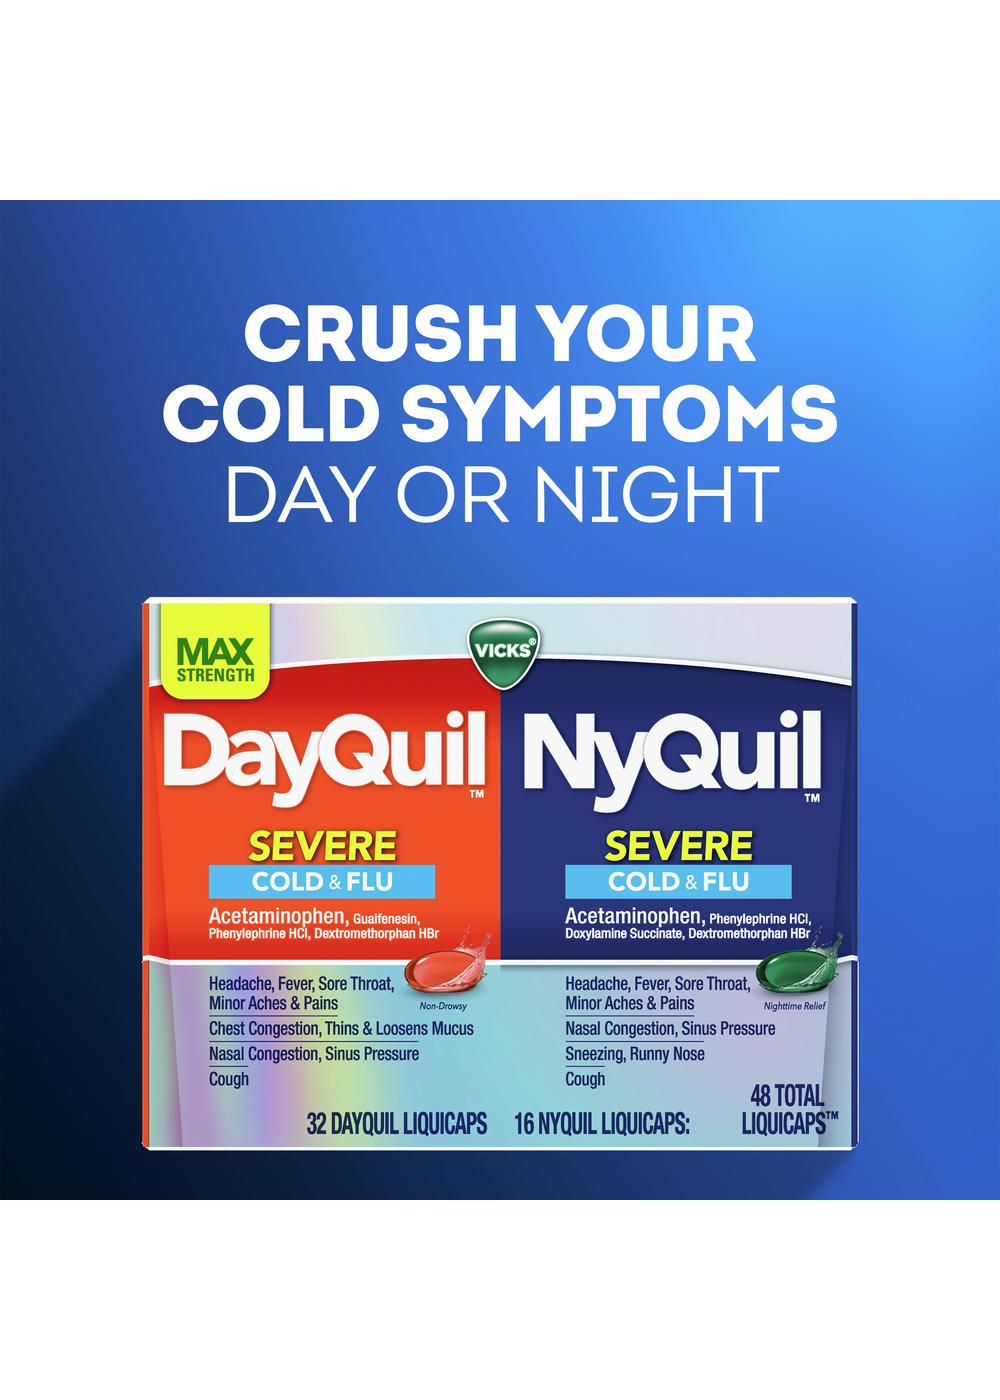 Vicks DayQuil + NyQuil SEVERE Cold & Flu Combo Pack; image 3 of 9